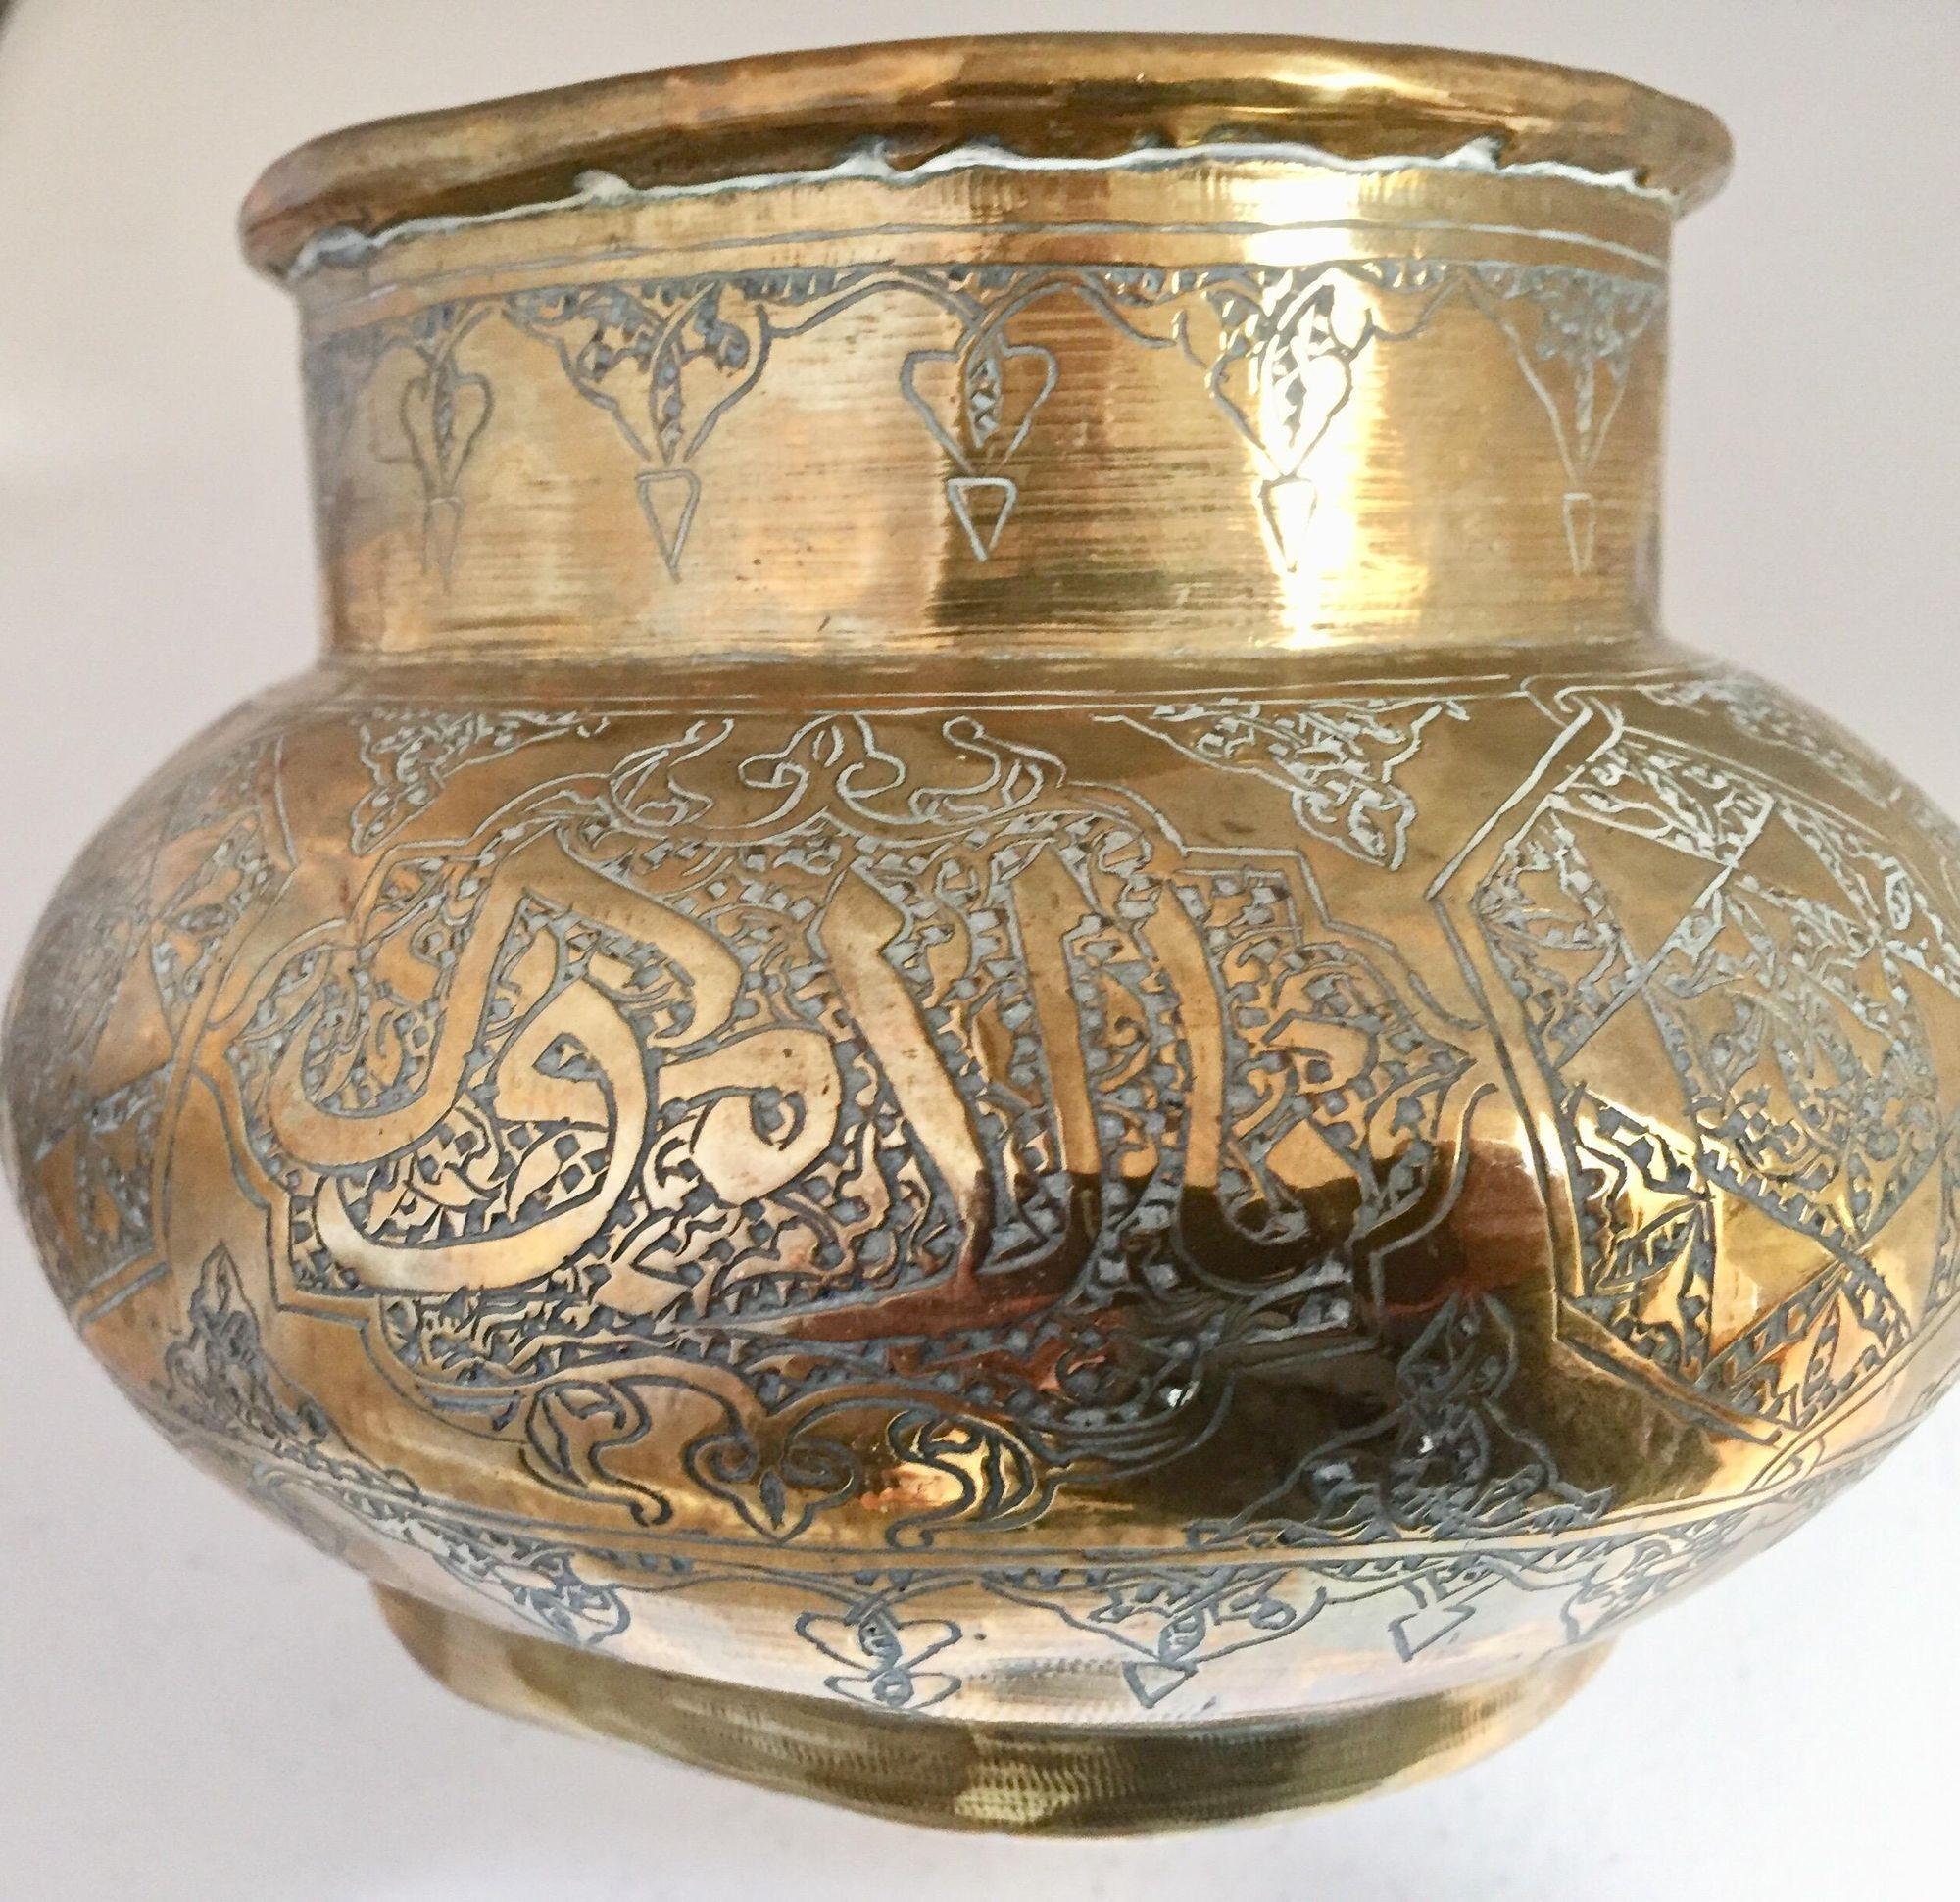 Middle Eastern Hand-Etched Islamic Brass Vase with Calligraphy Writing For Sale 4